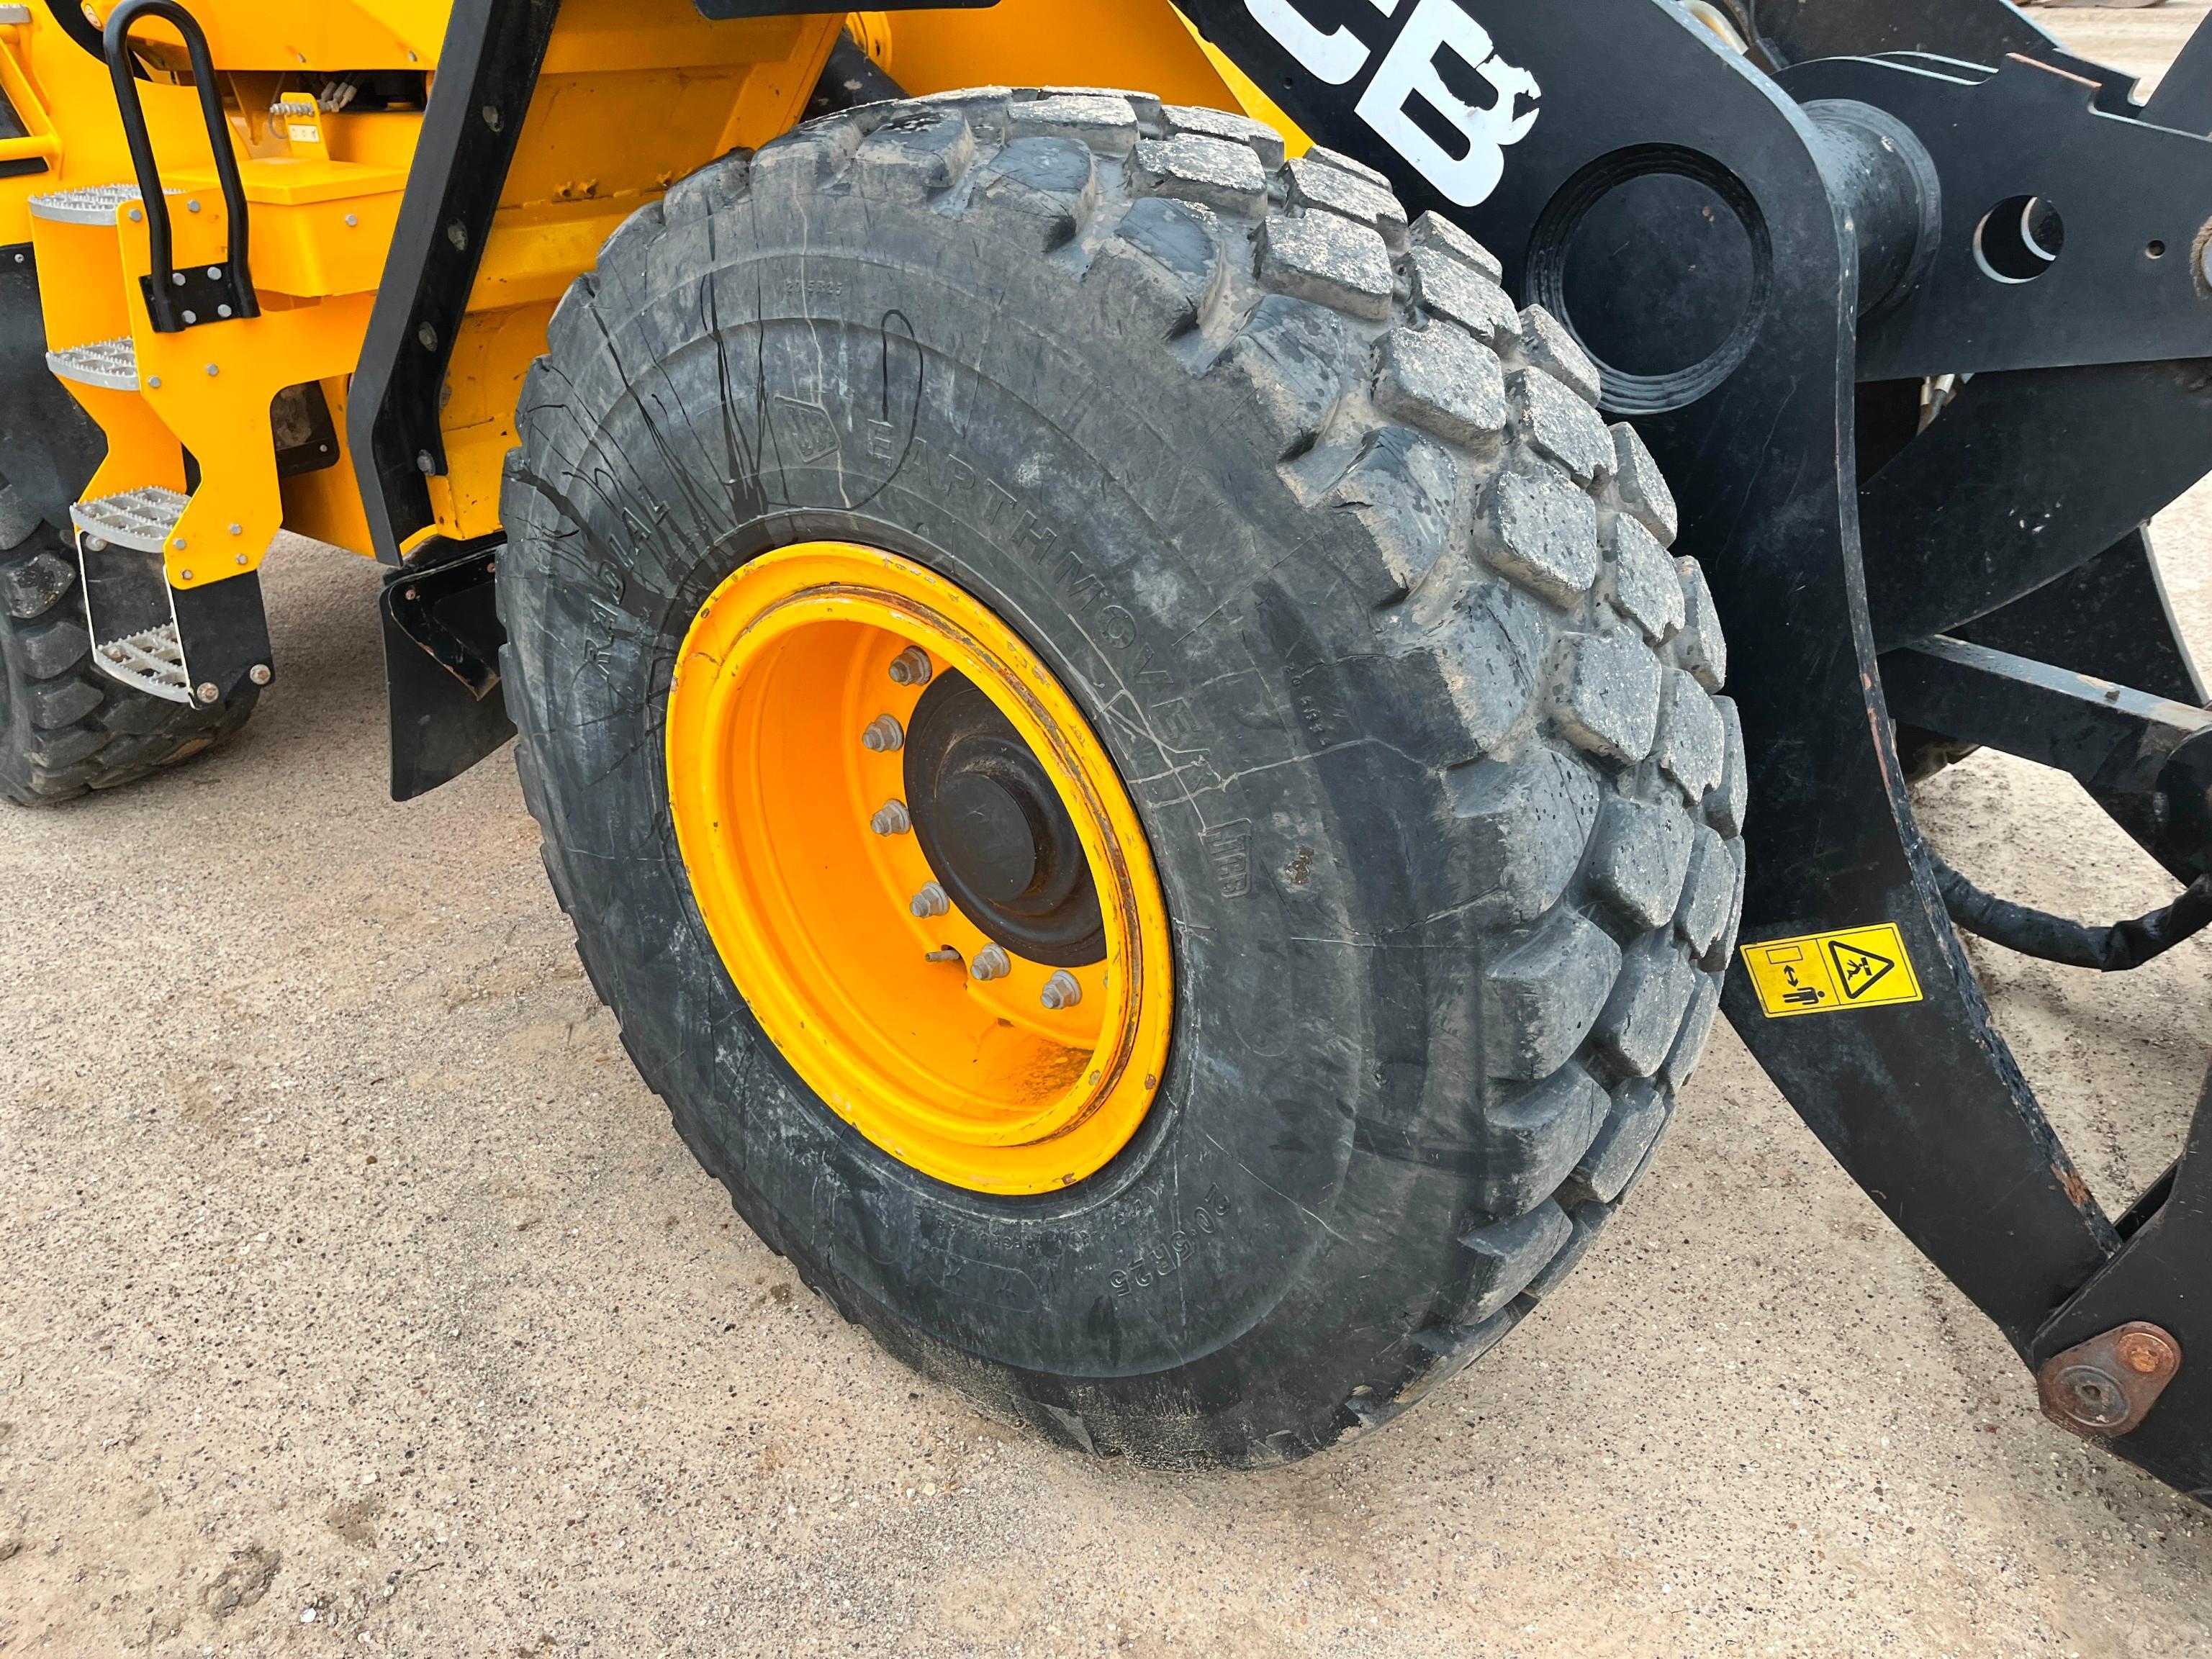 JCB 427ZX RUBBER TIRED LOADER SN:JCB4A6AEVM2474207 powered by 6.7 liter diesel engine, equipped with